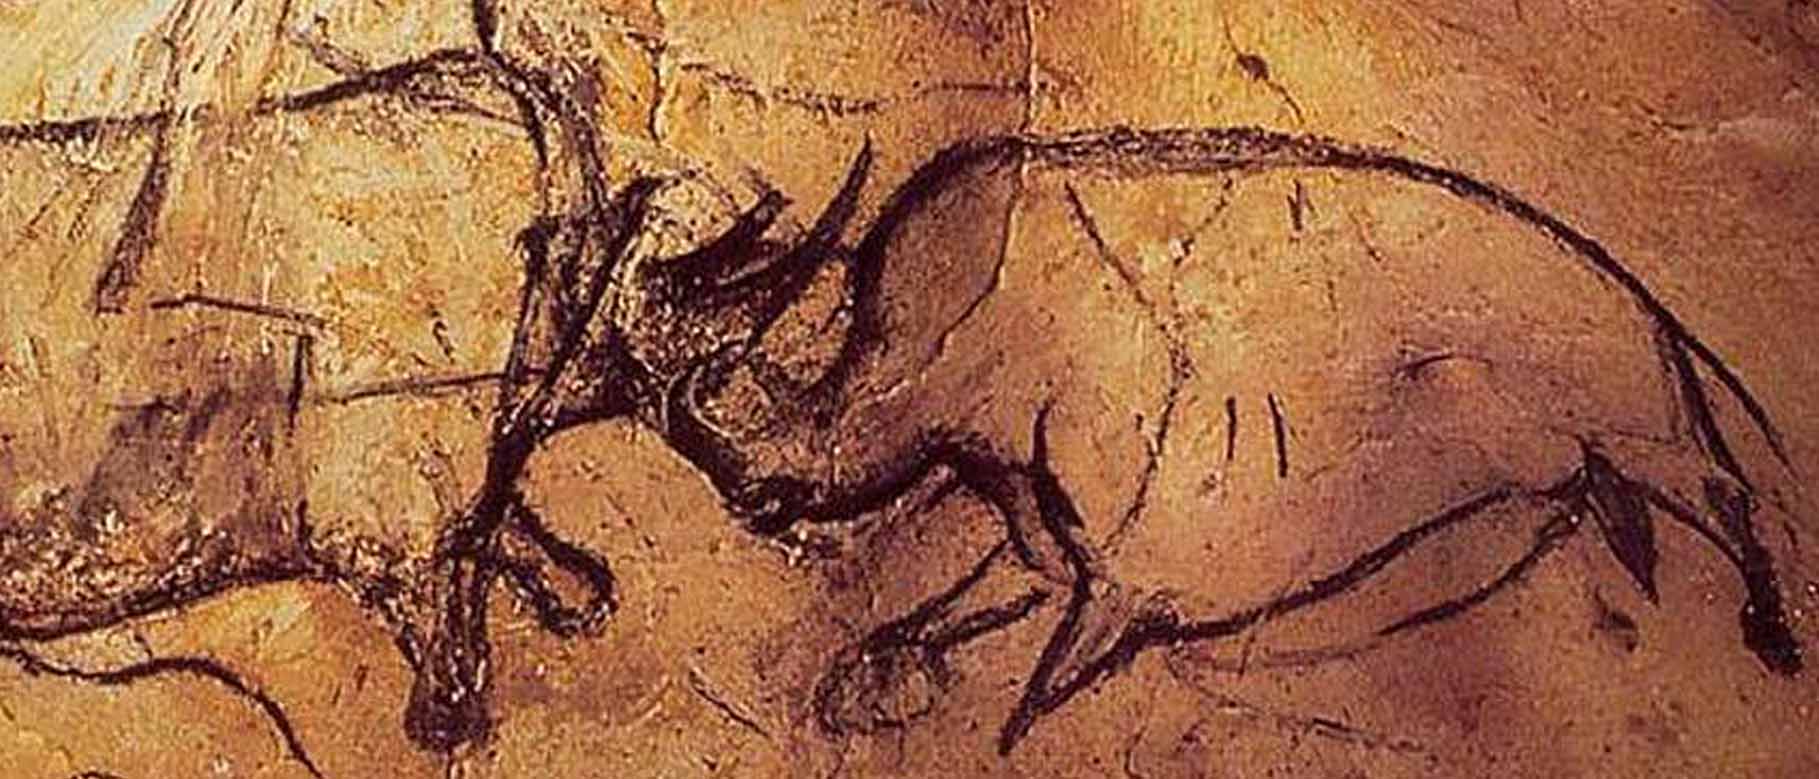 A drawing of fighting rhinos from the Chauvet Cave in France